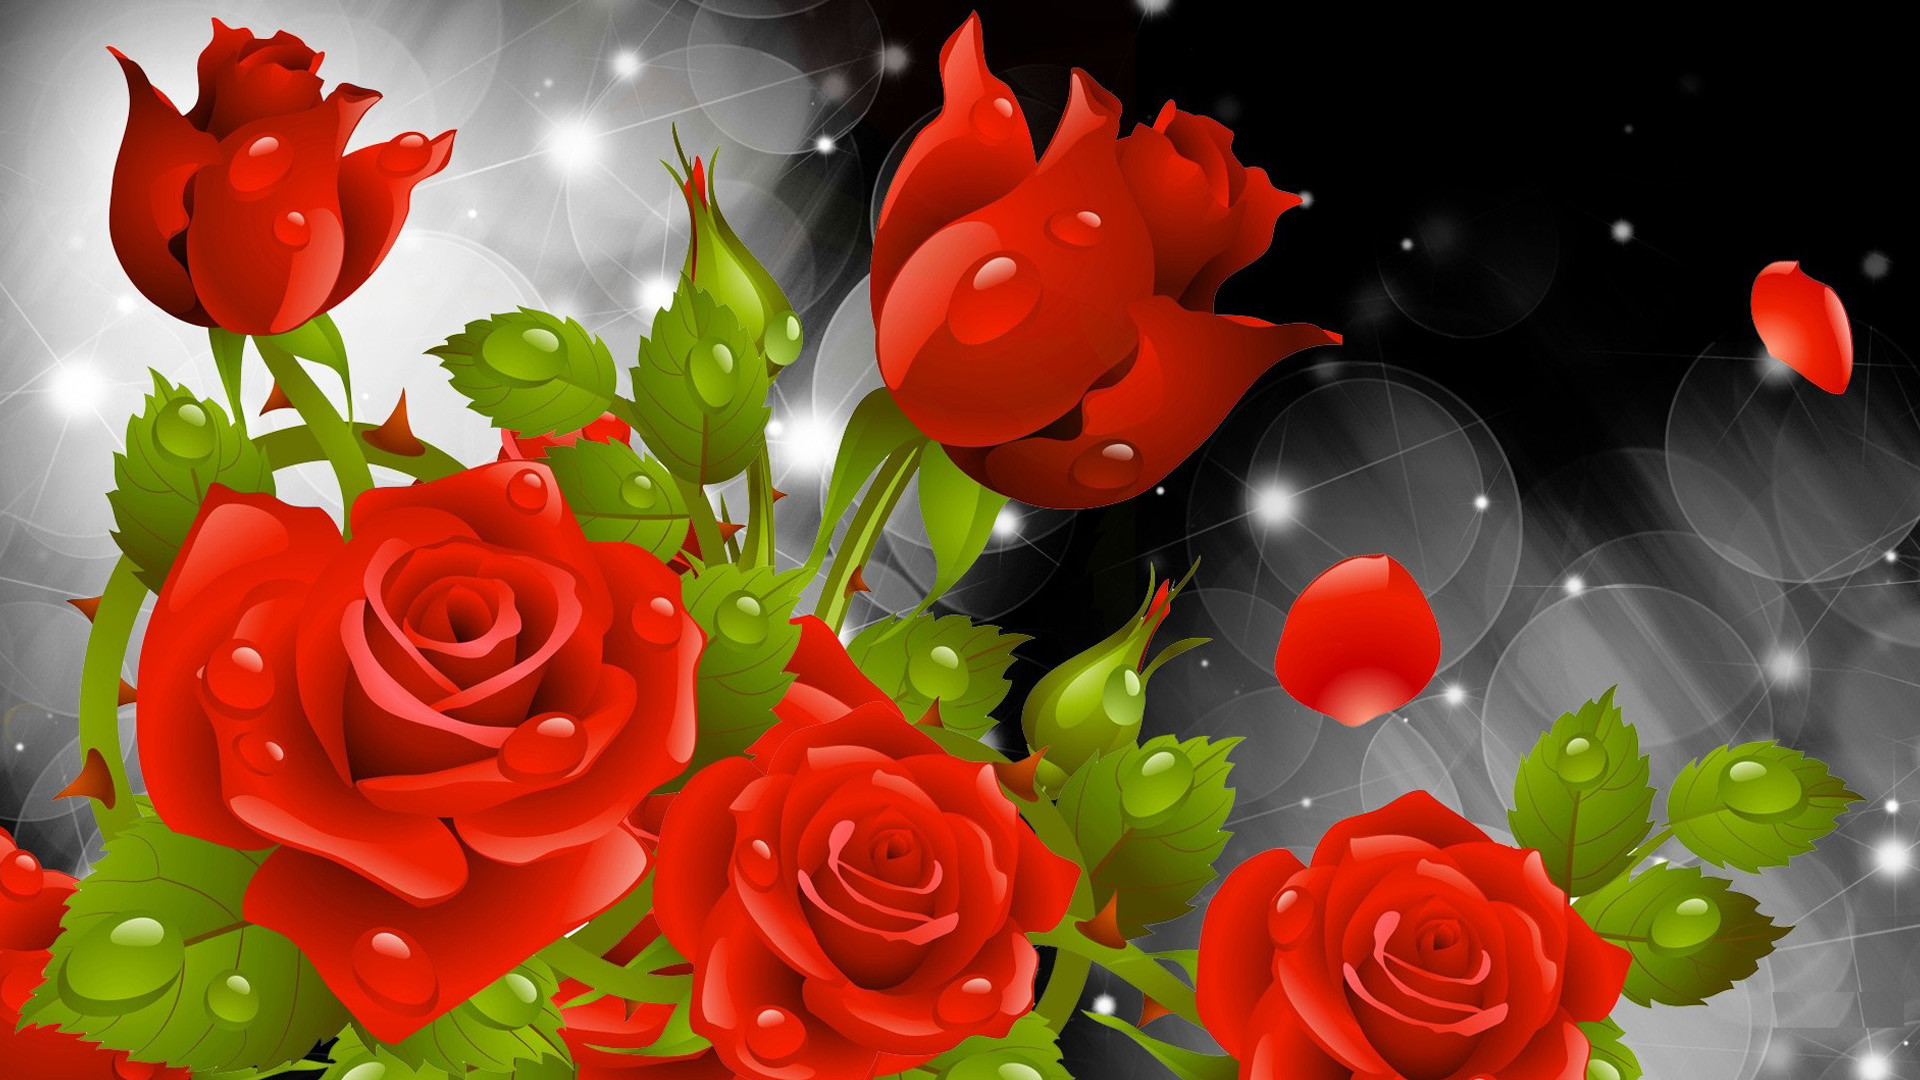 1920x1080 Red Rose Wallpaper (33 Wallpapers)